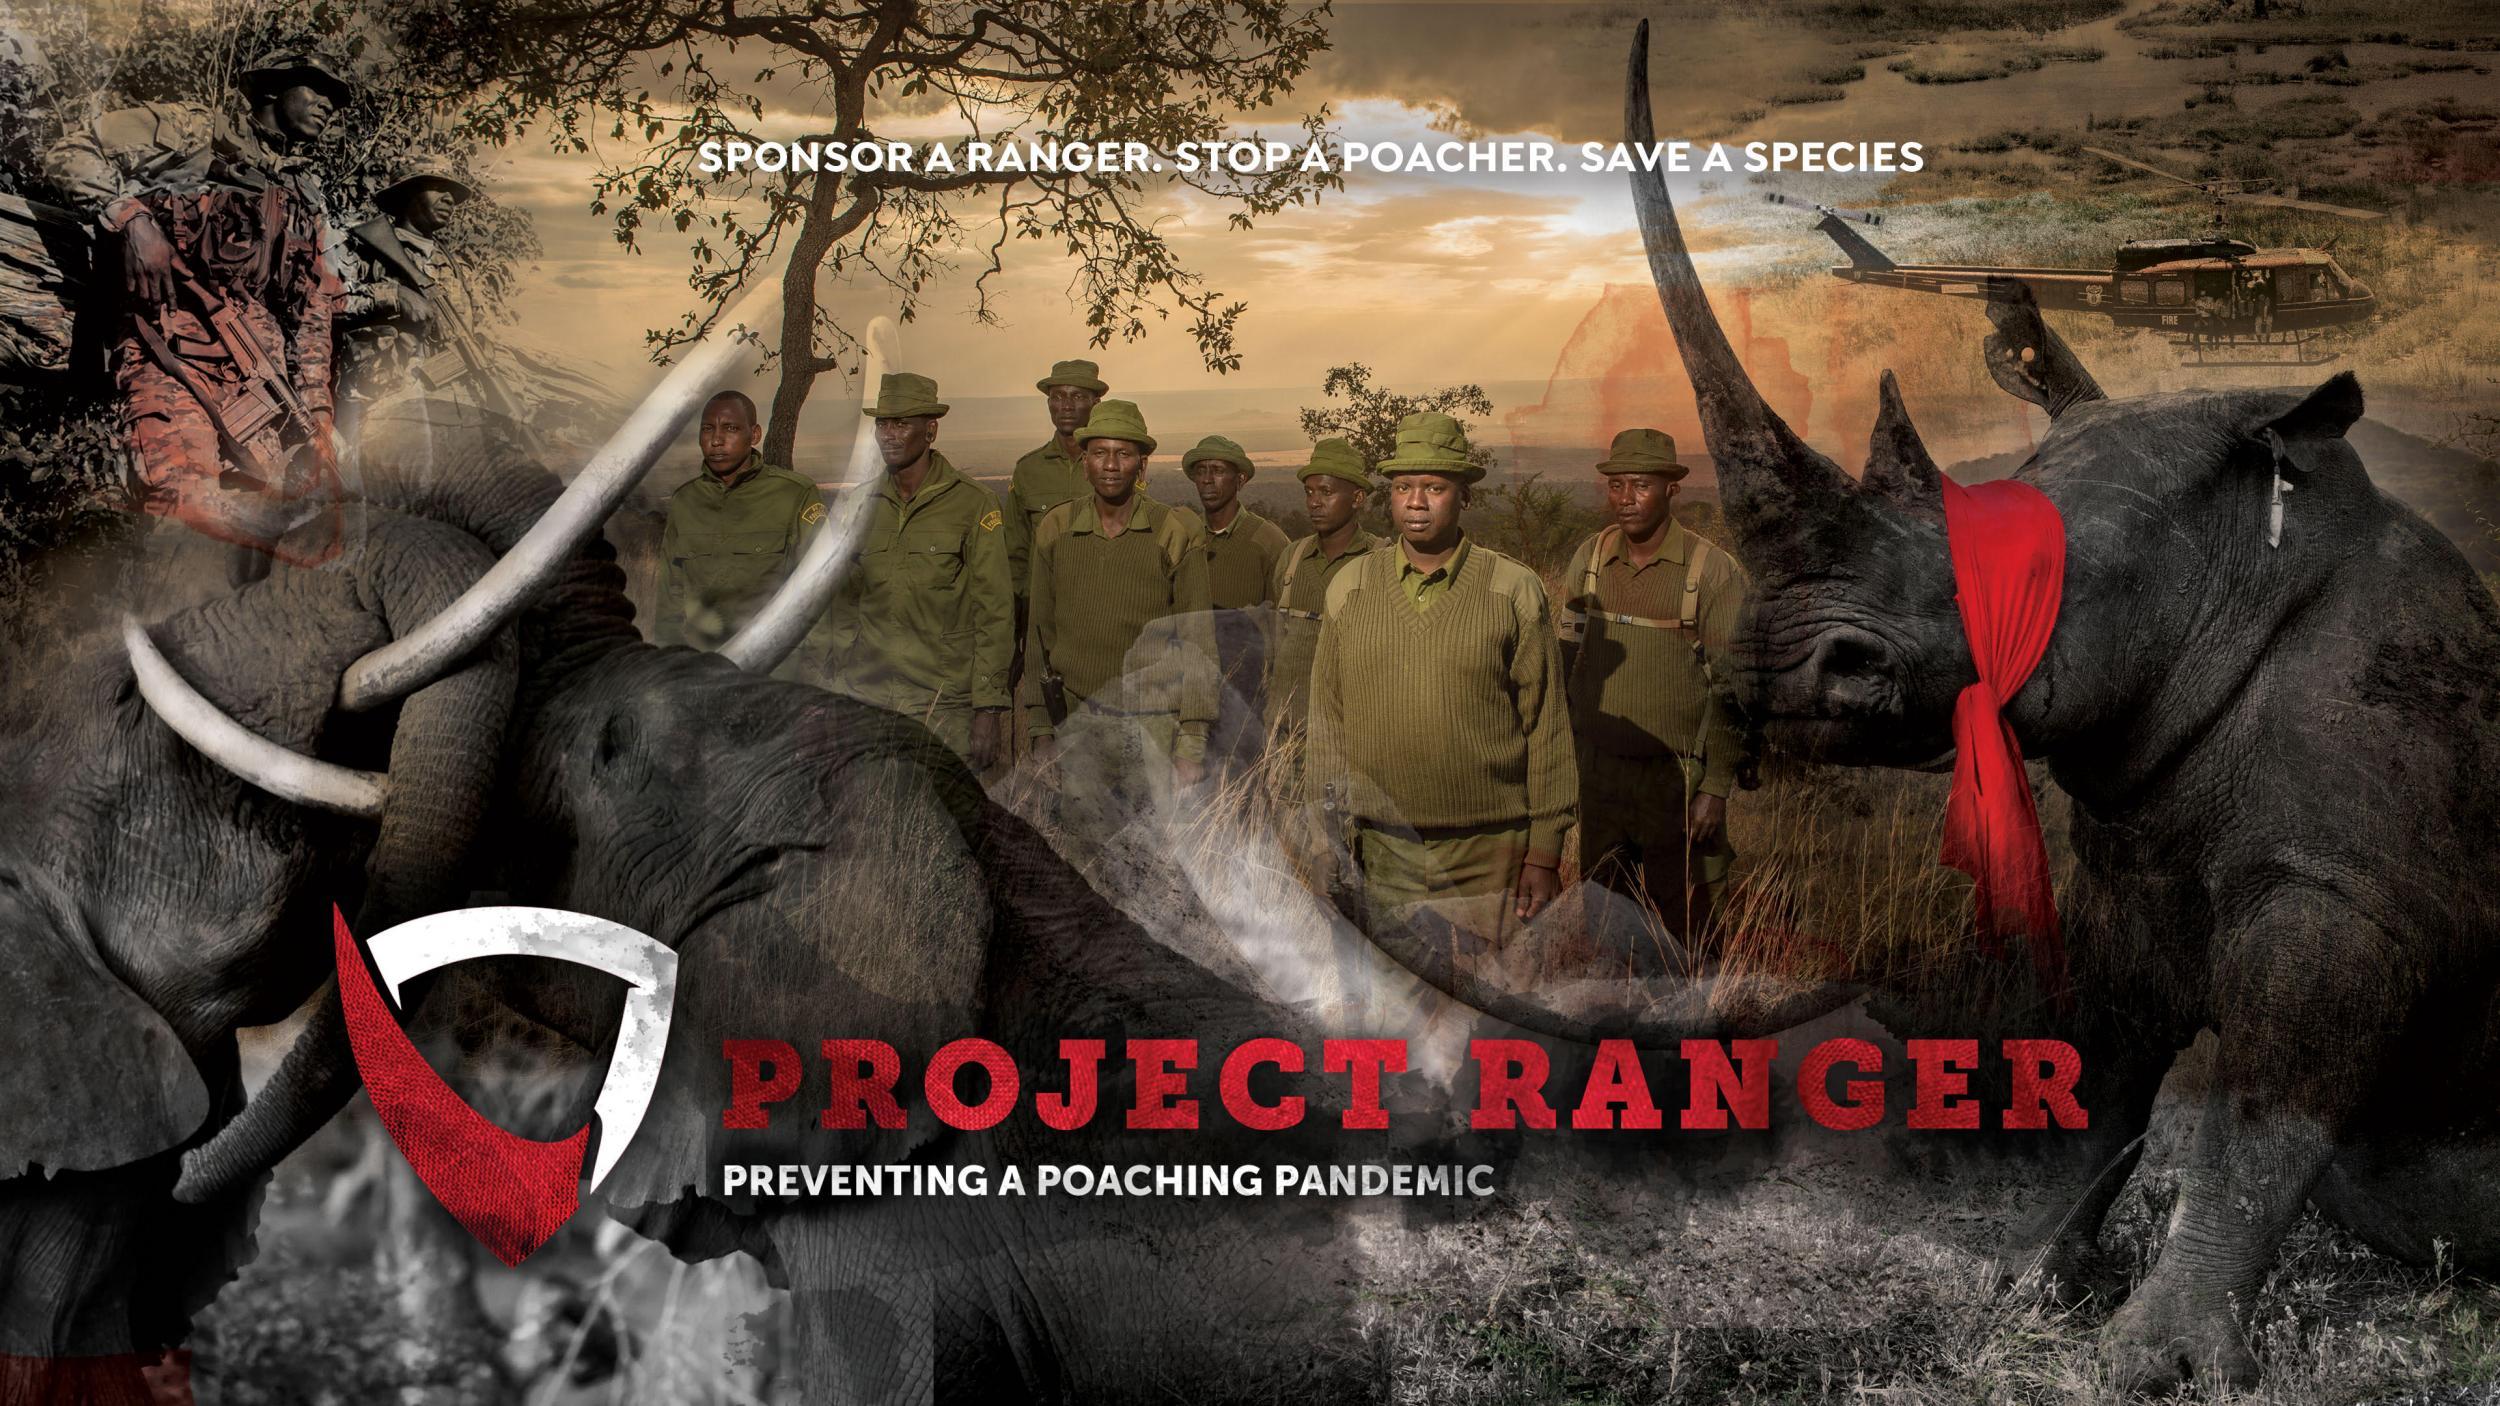 Project Ranger is an emergency intervention to protect frontline staff set up by Dereck and Beverly Joubert